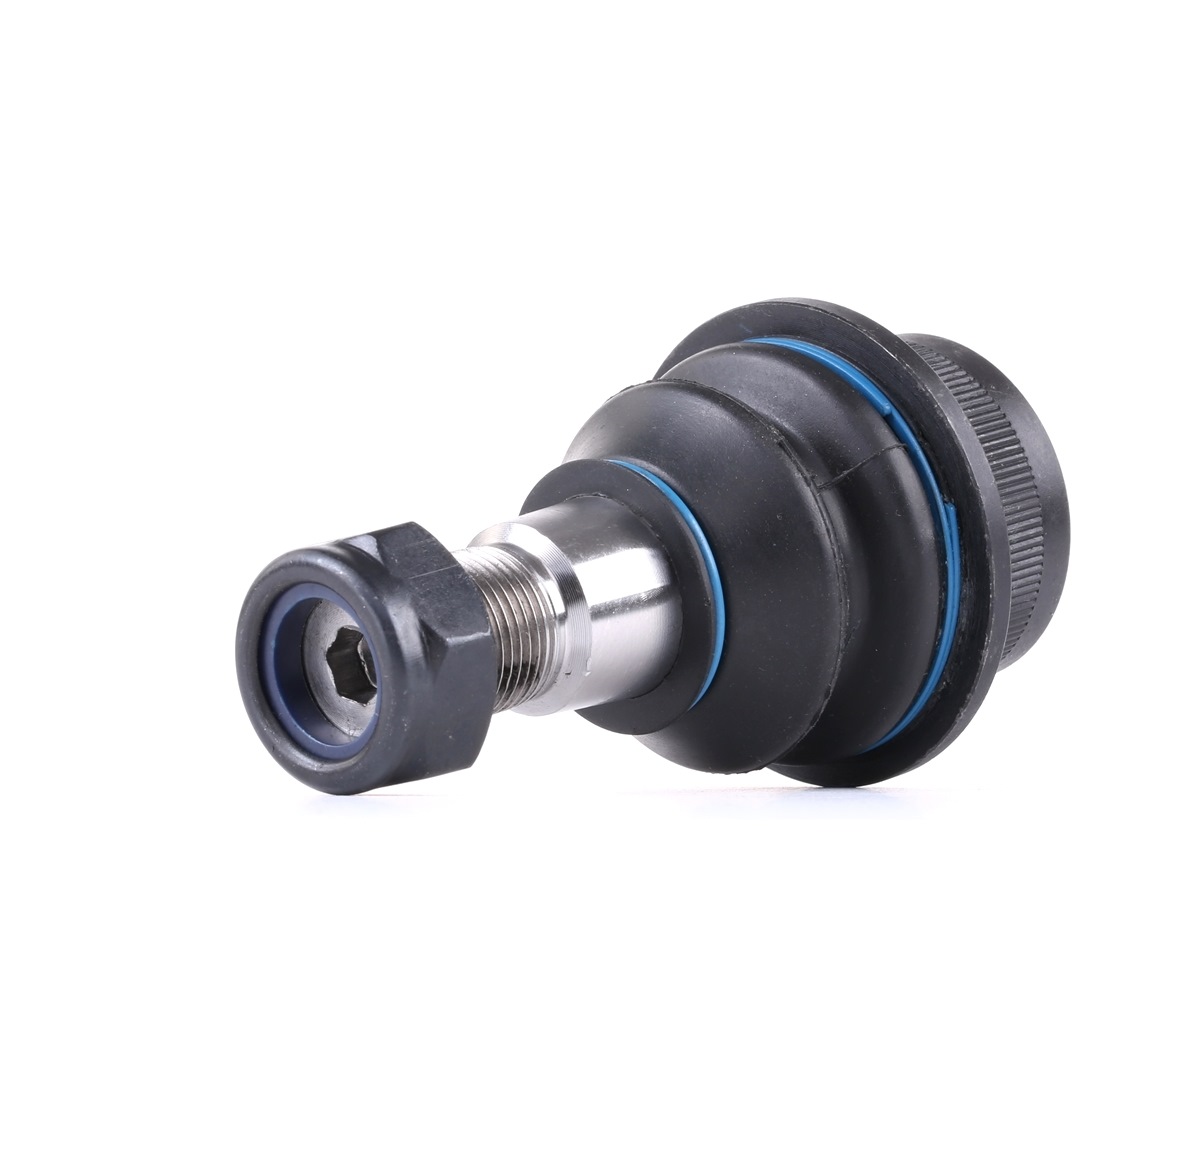 RIDEX Front axle both sides, Lower Front Axle, 23,5mm, 1:10 Cone Size: 23,5mm, Thread Size: M20X1.5 Suspension ball joint 2462S0046 buy